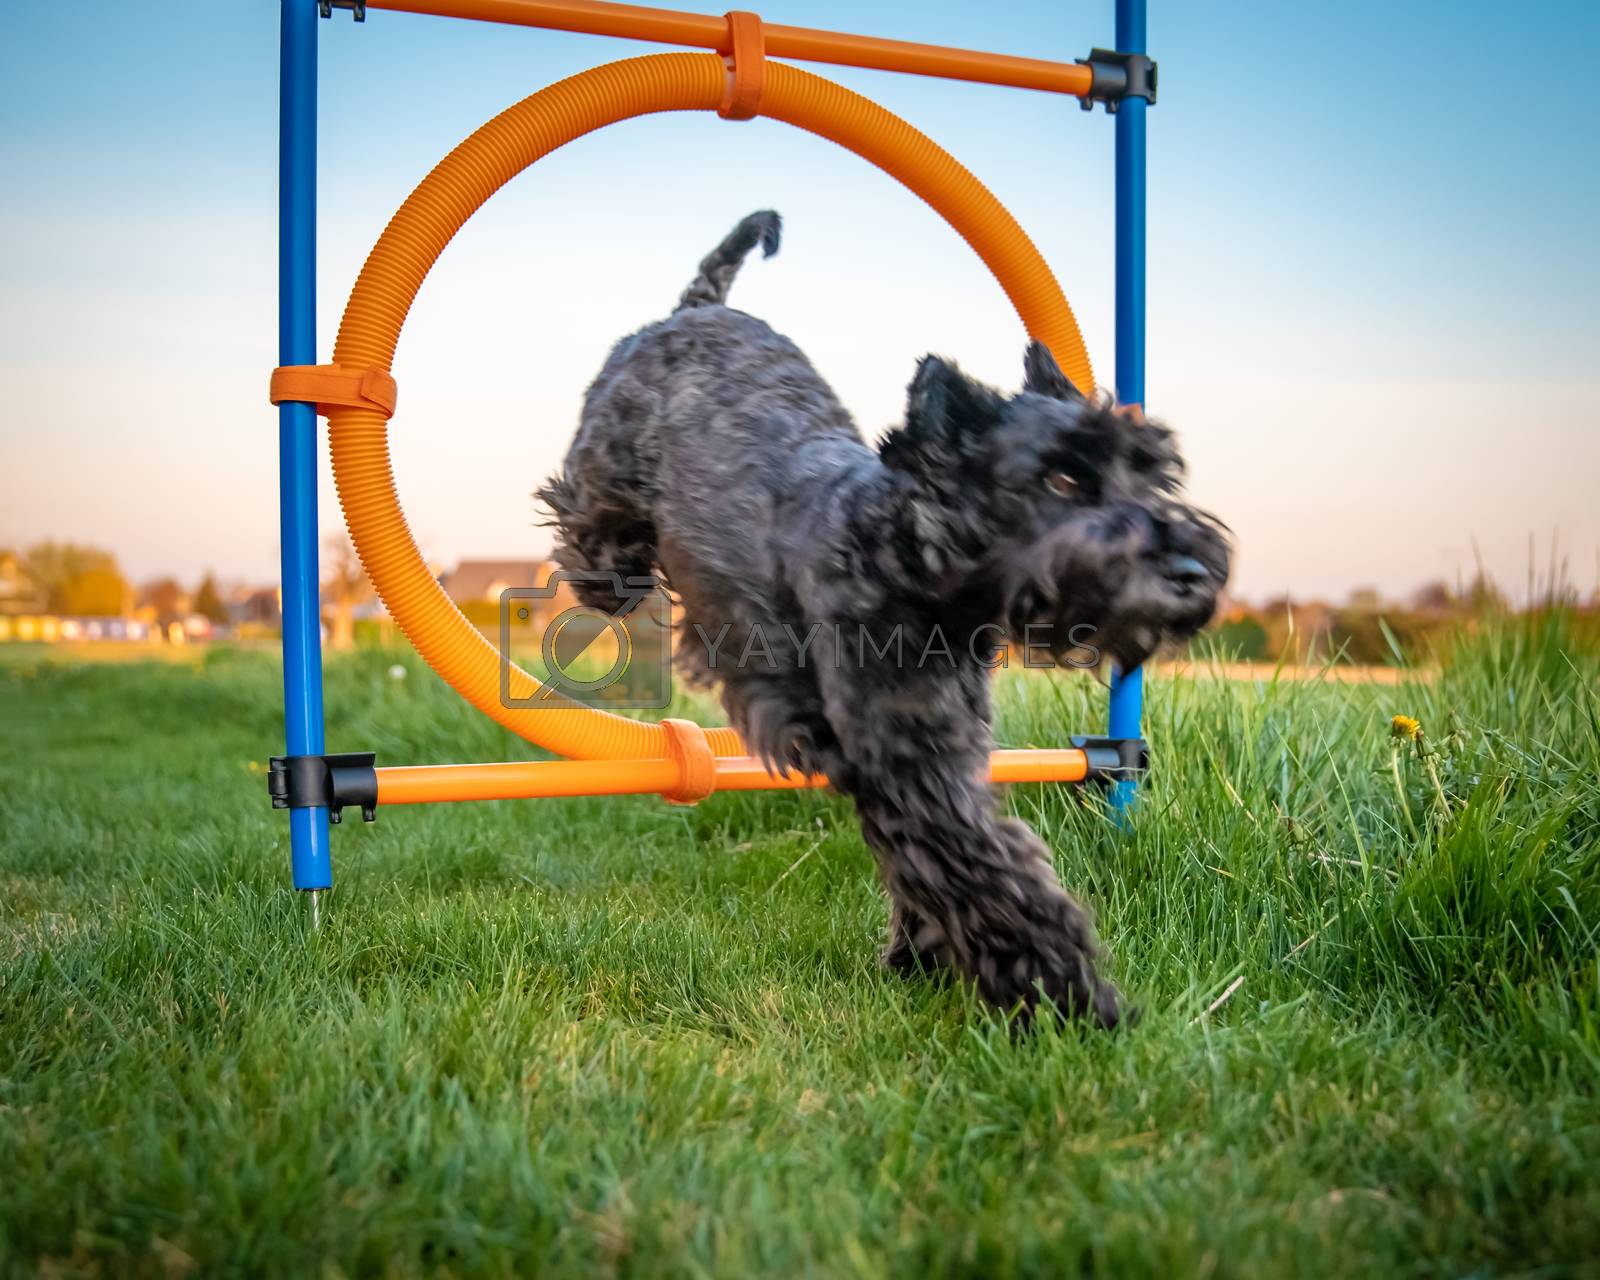 Royalty free image of little black dog on agility jumps over a circle at sunset by Edophoto